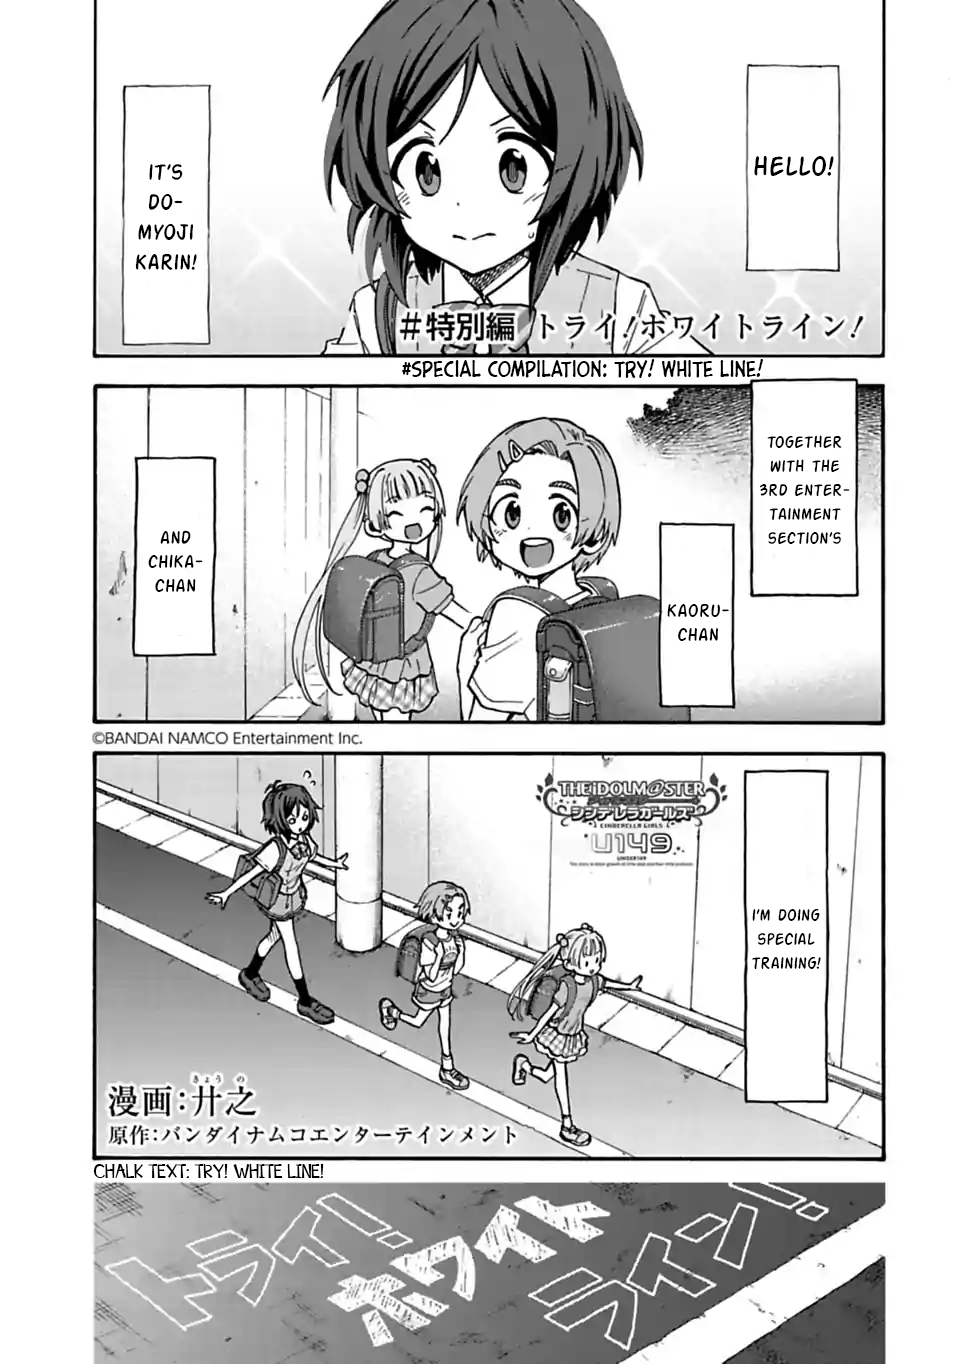 The Idolm@ster Cinderella Girls - U149 Chapter 69.1: Special Compilation - Try! White Line! - Picture 1